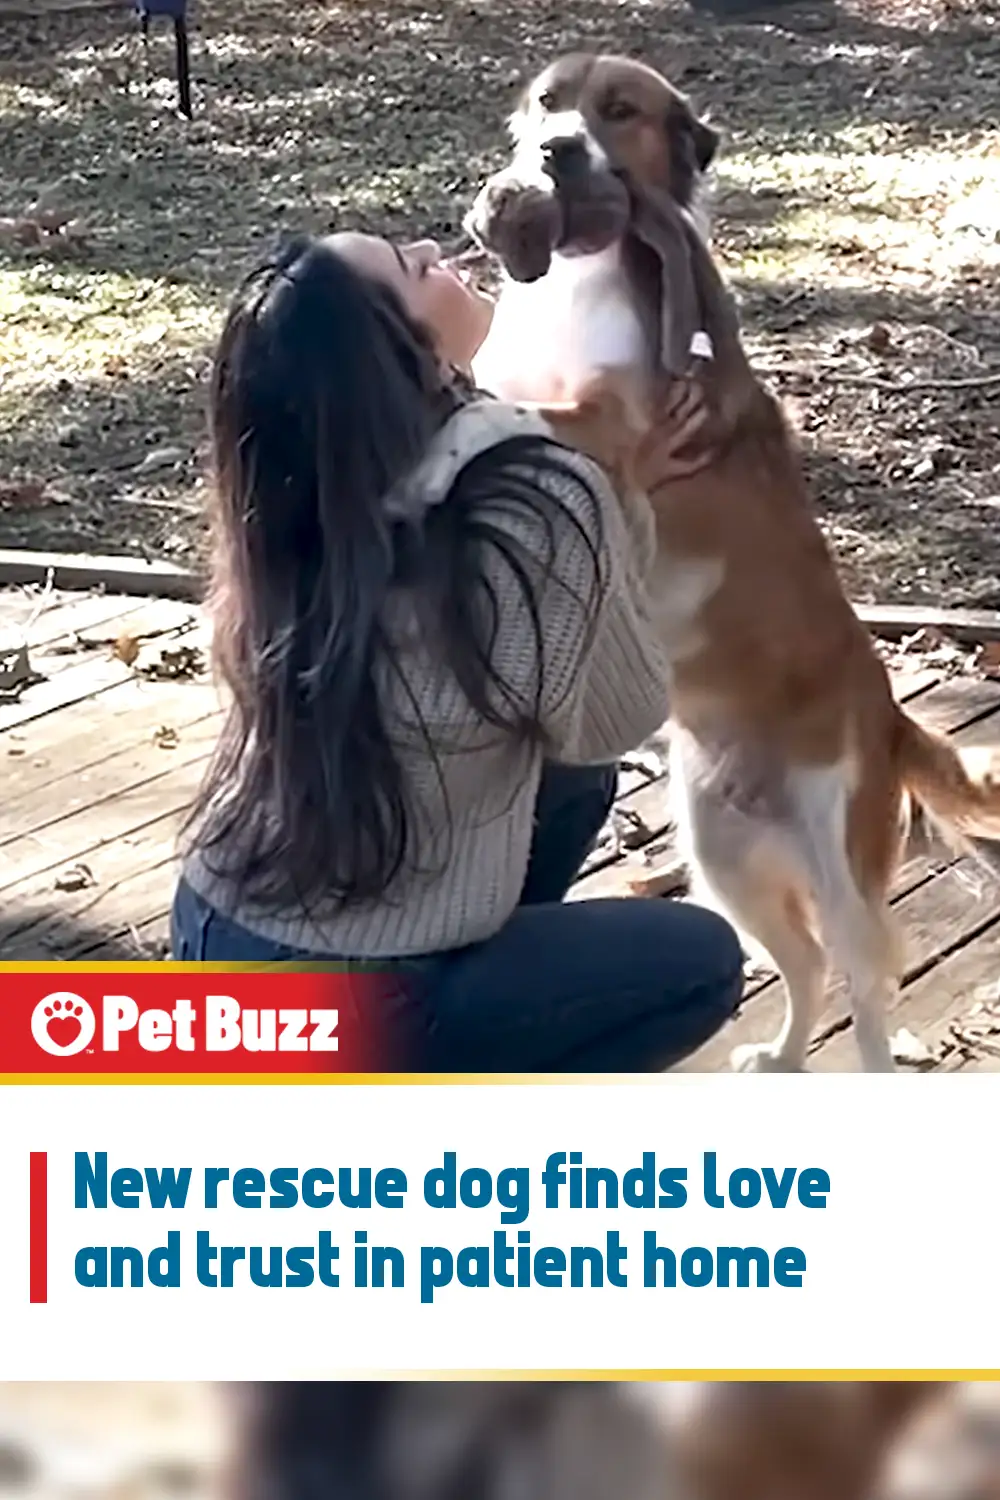 New rescue dog finds love and trust in patient home